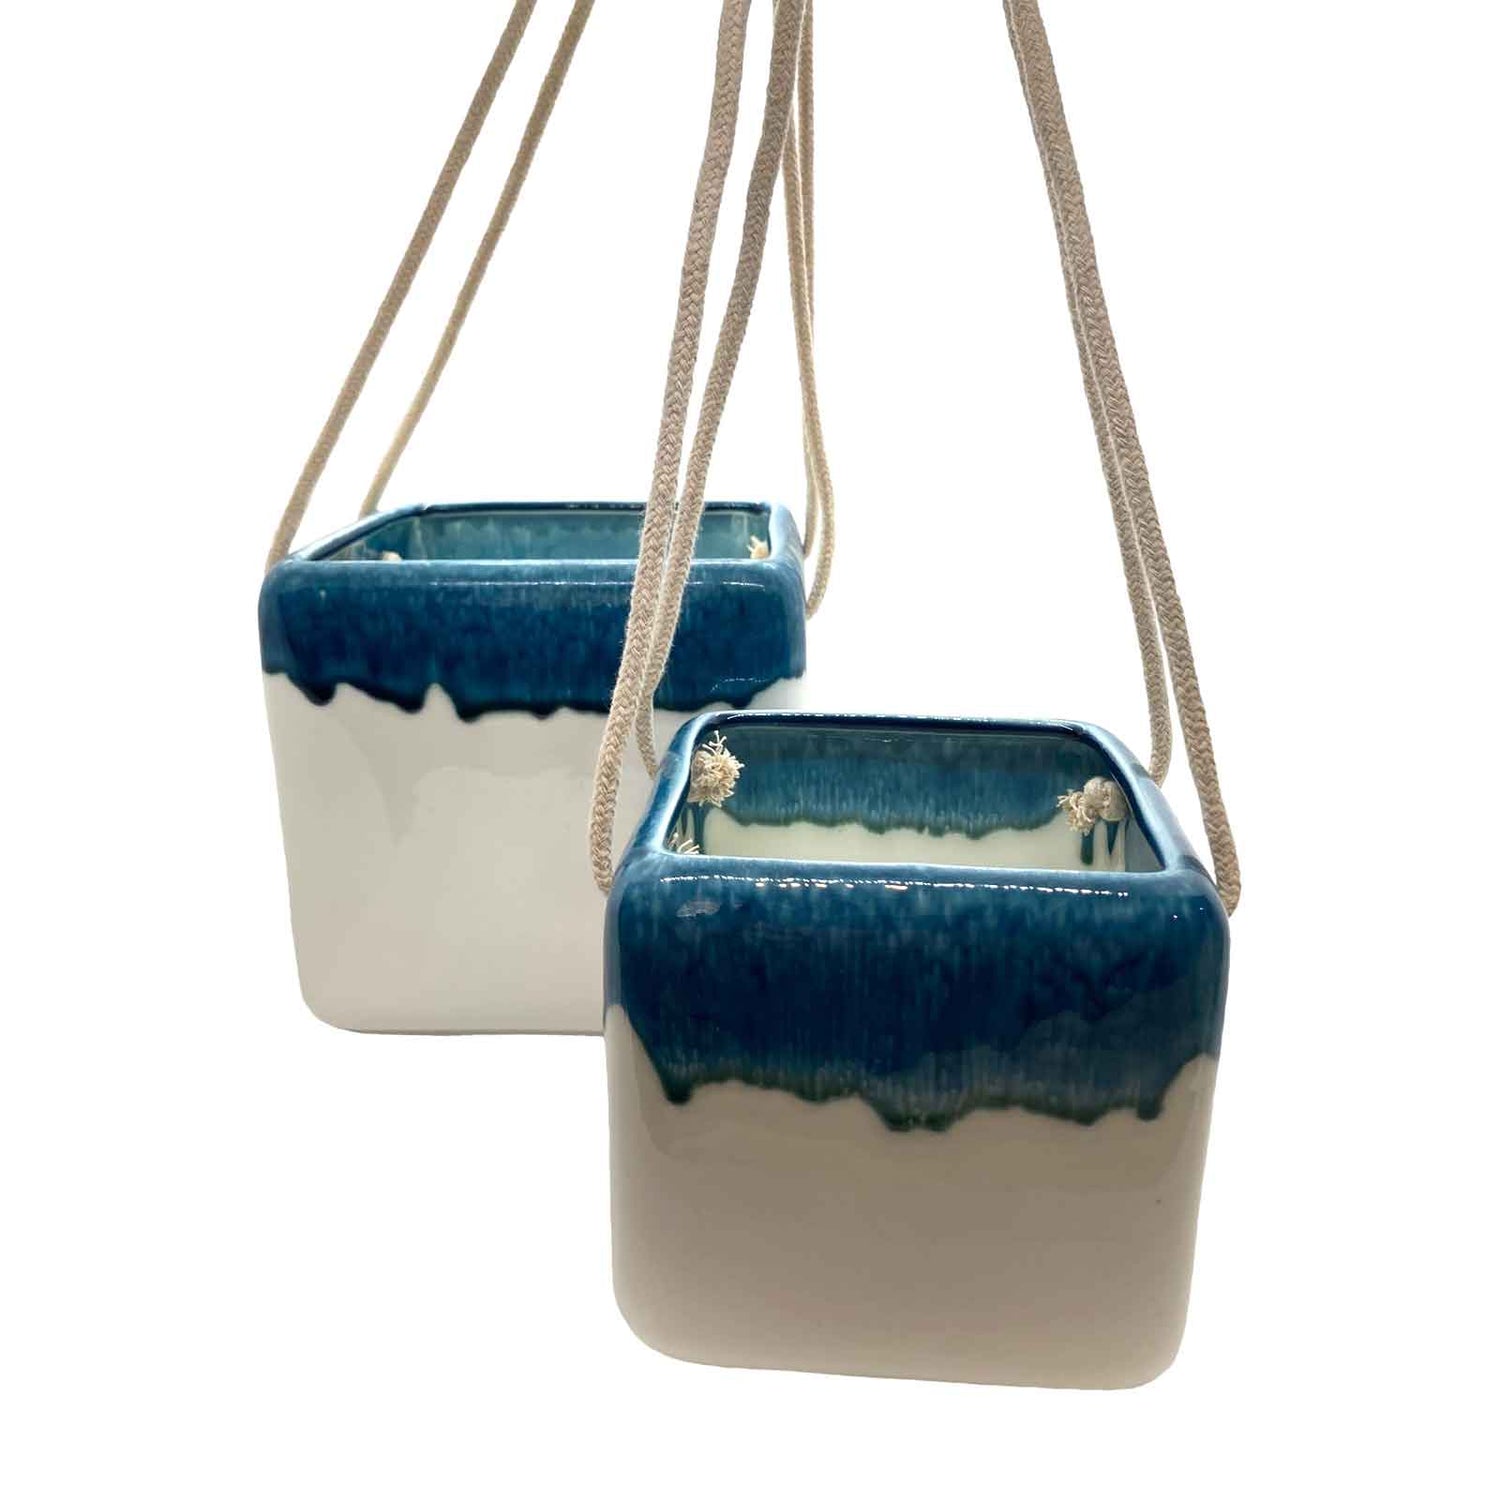 Ceramic Drip Glaze Hanging Planters - Large and Small